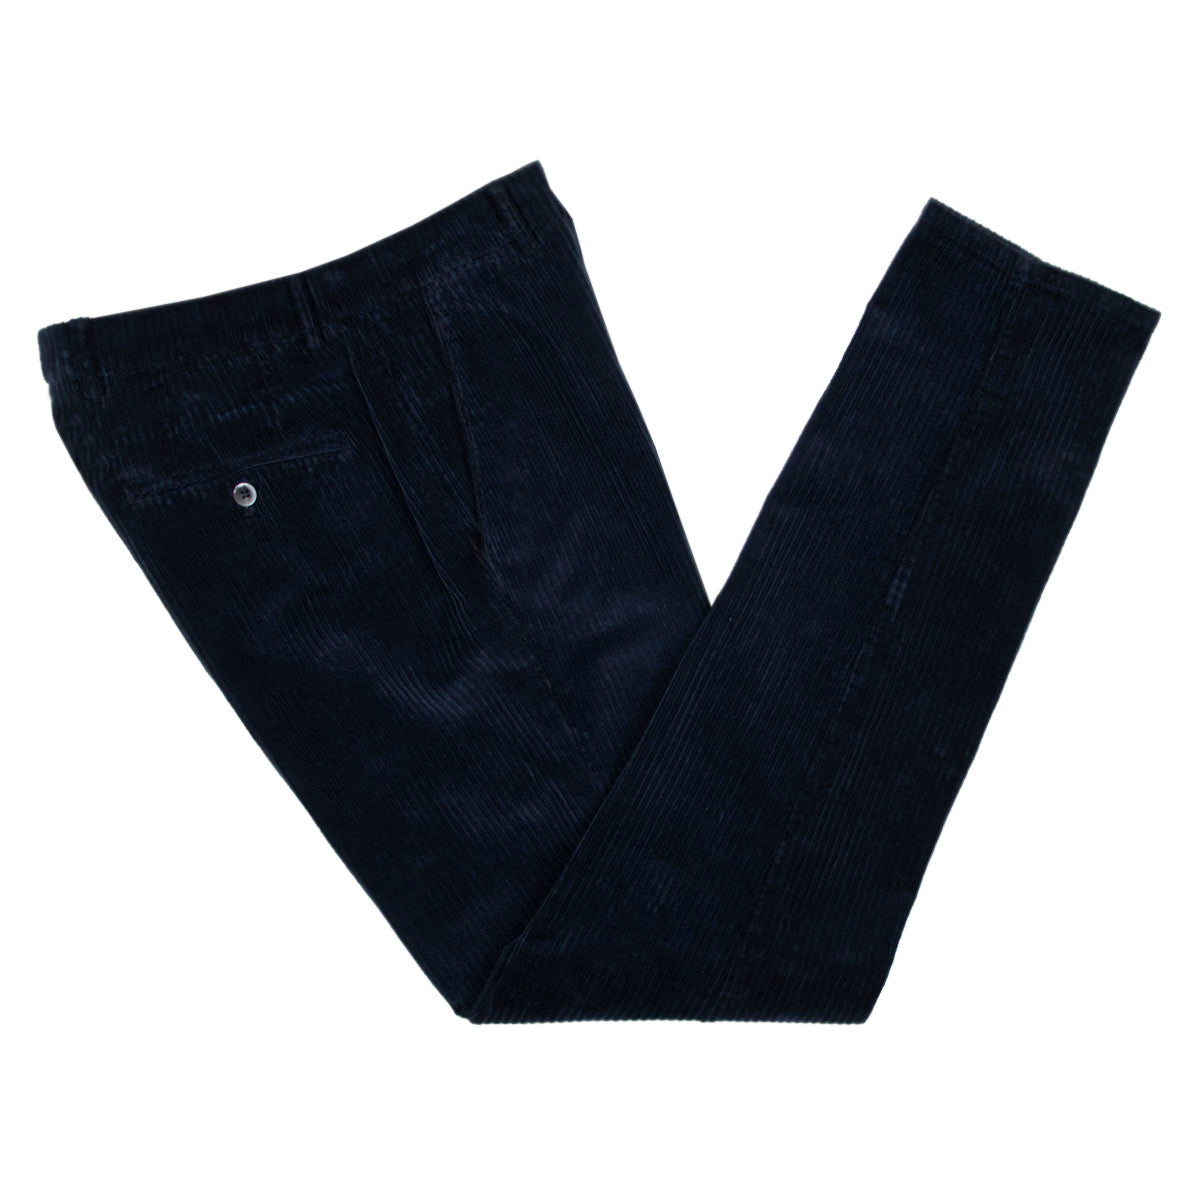 Midnight Navy Stretch Cotton Corduroy Trousers  Robert Old   